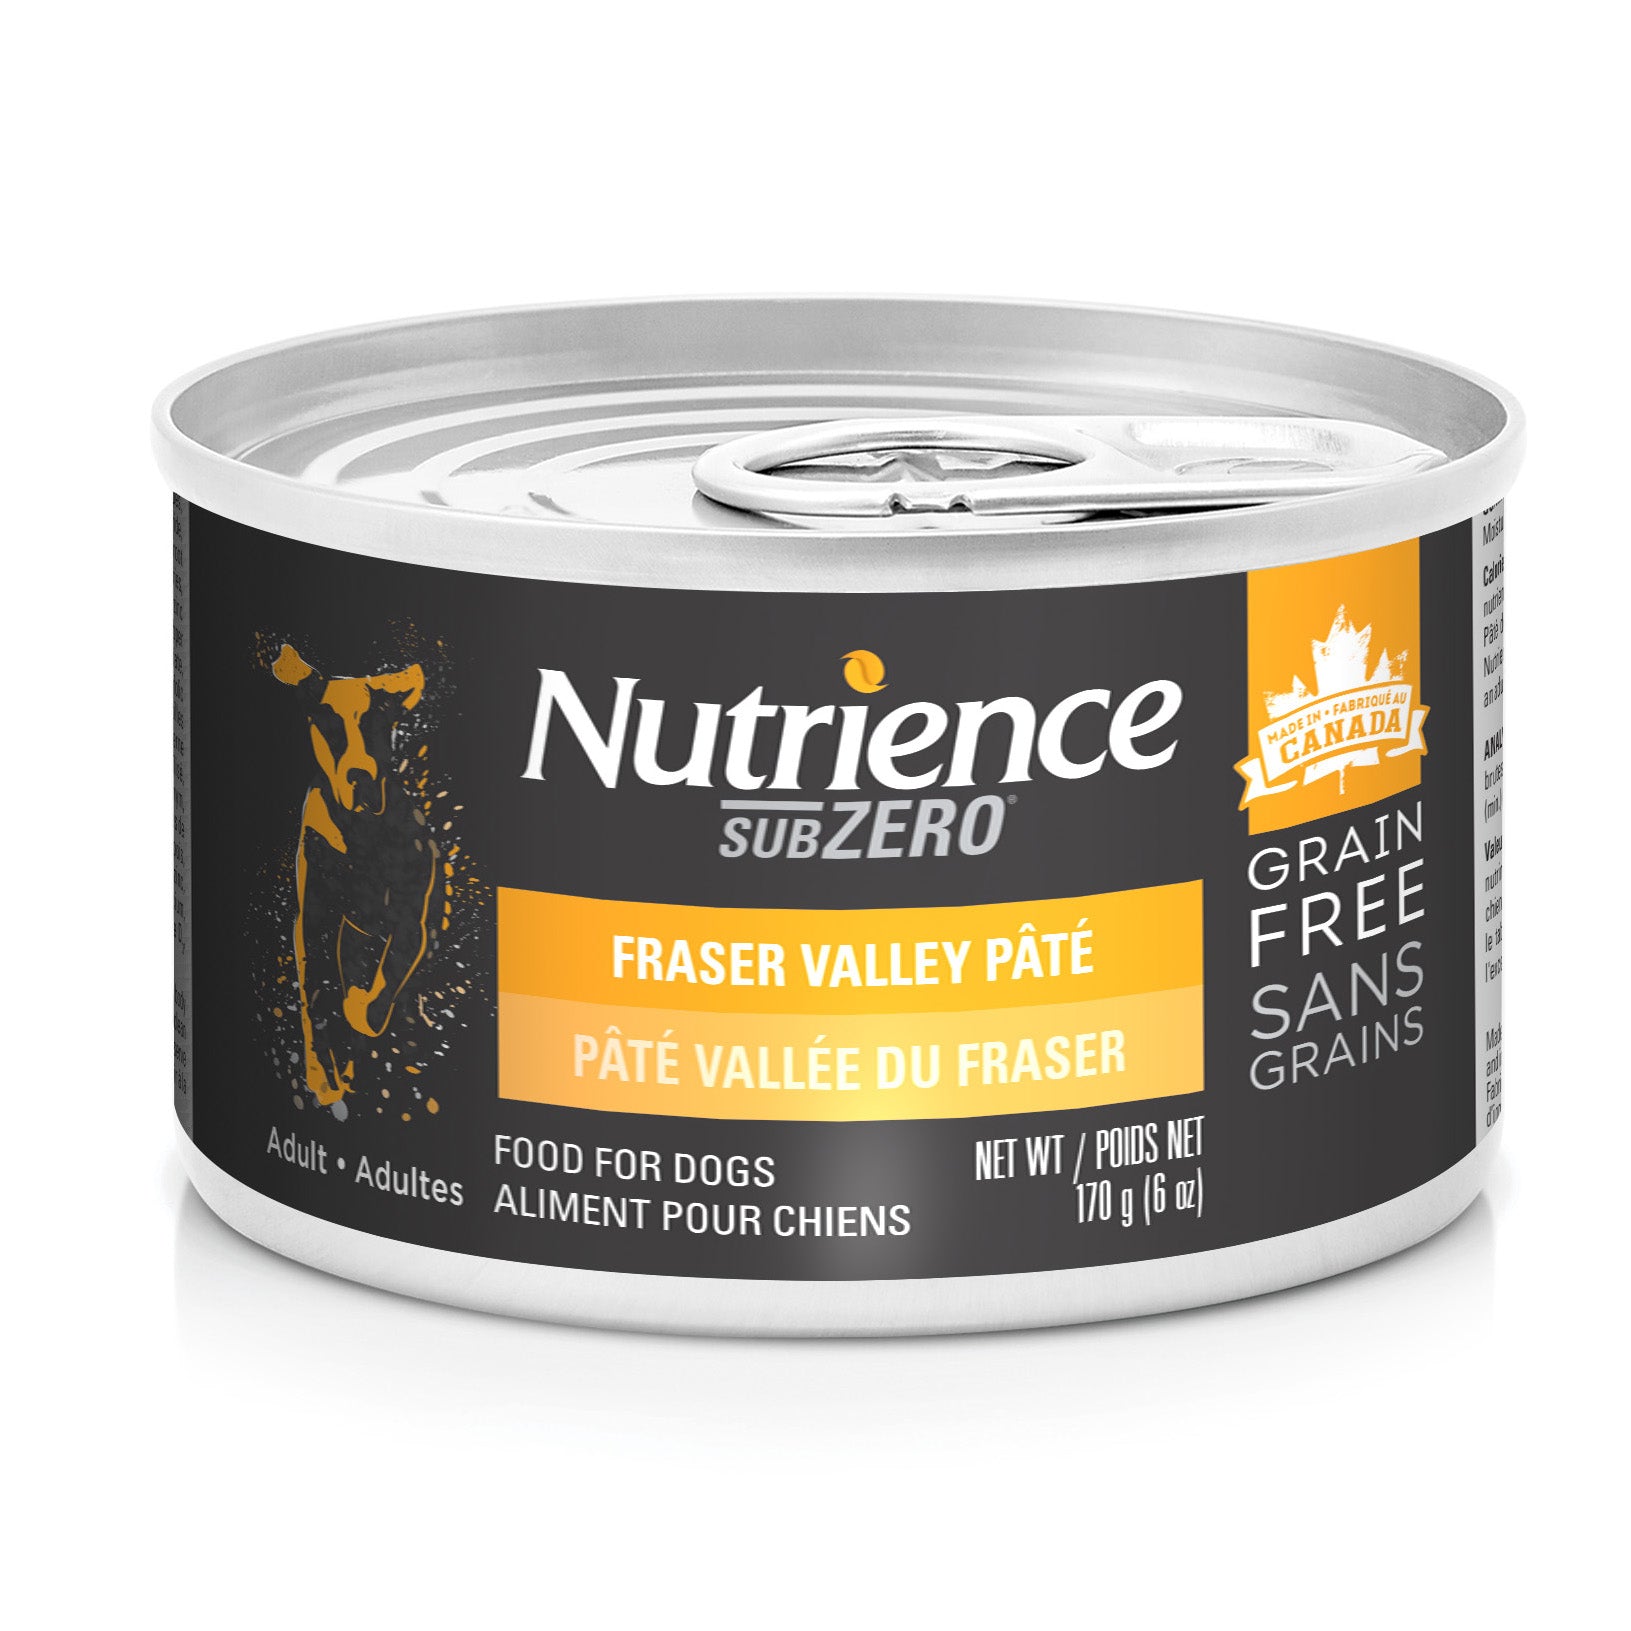 Nutrience Canned Adult Dog Food Grain Free SubZero Fraser Valley 170g Canned Dog Food 170g | PetMax Canada